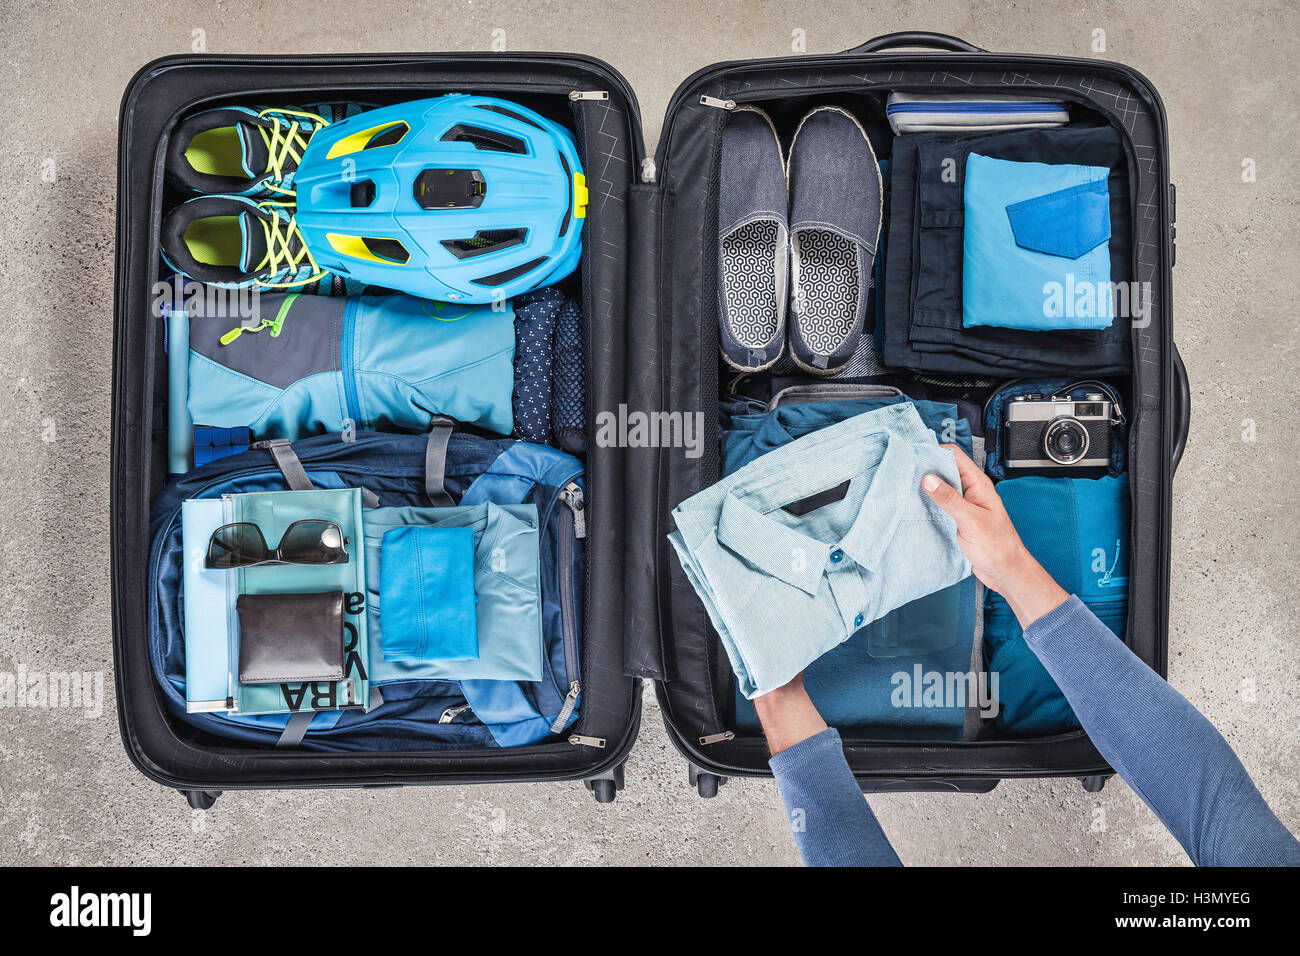 Overhead view of man's hands packing suitcase with walking boots, bike helmet, backpack, retro camera and blue shirt Stock Photo